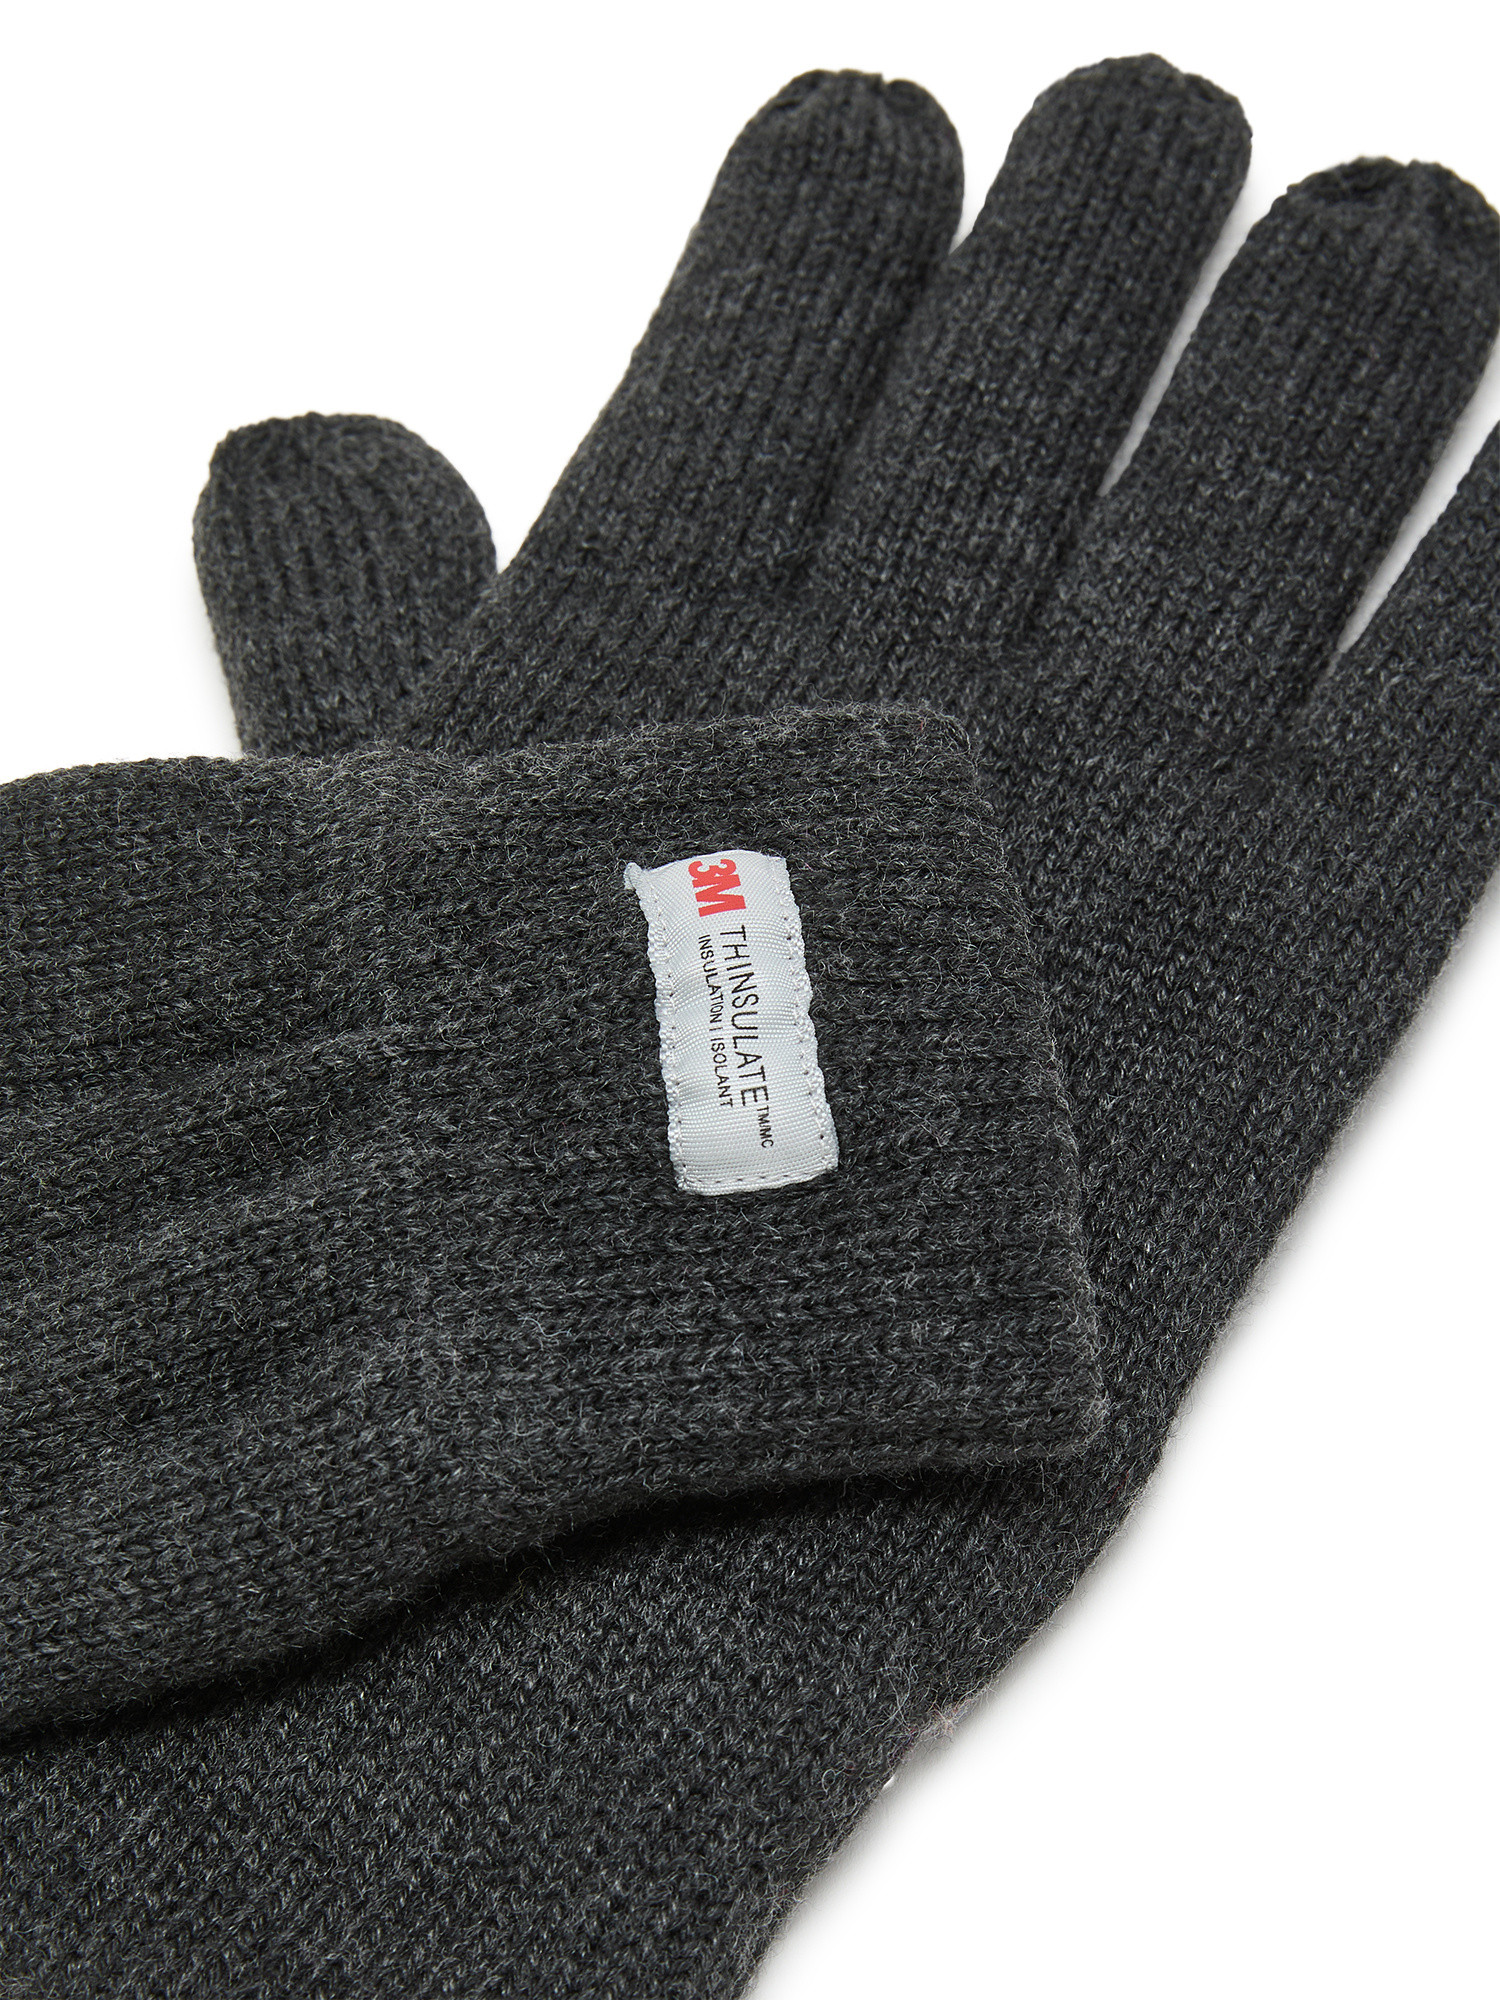 Luca D'Altieri - Knitted gloves, Anthracite, large image number 1